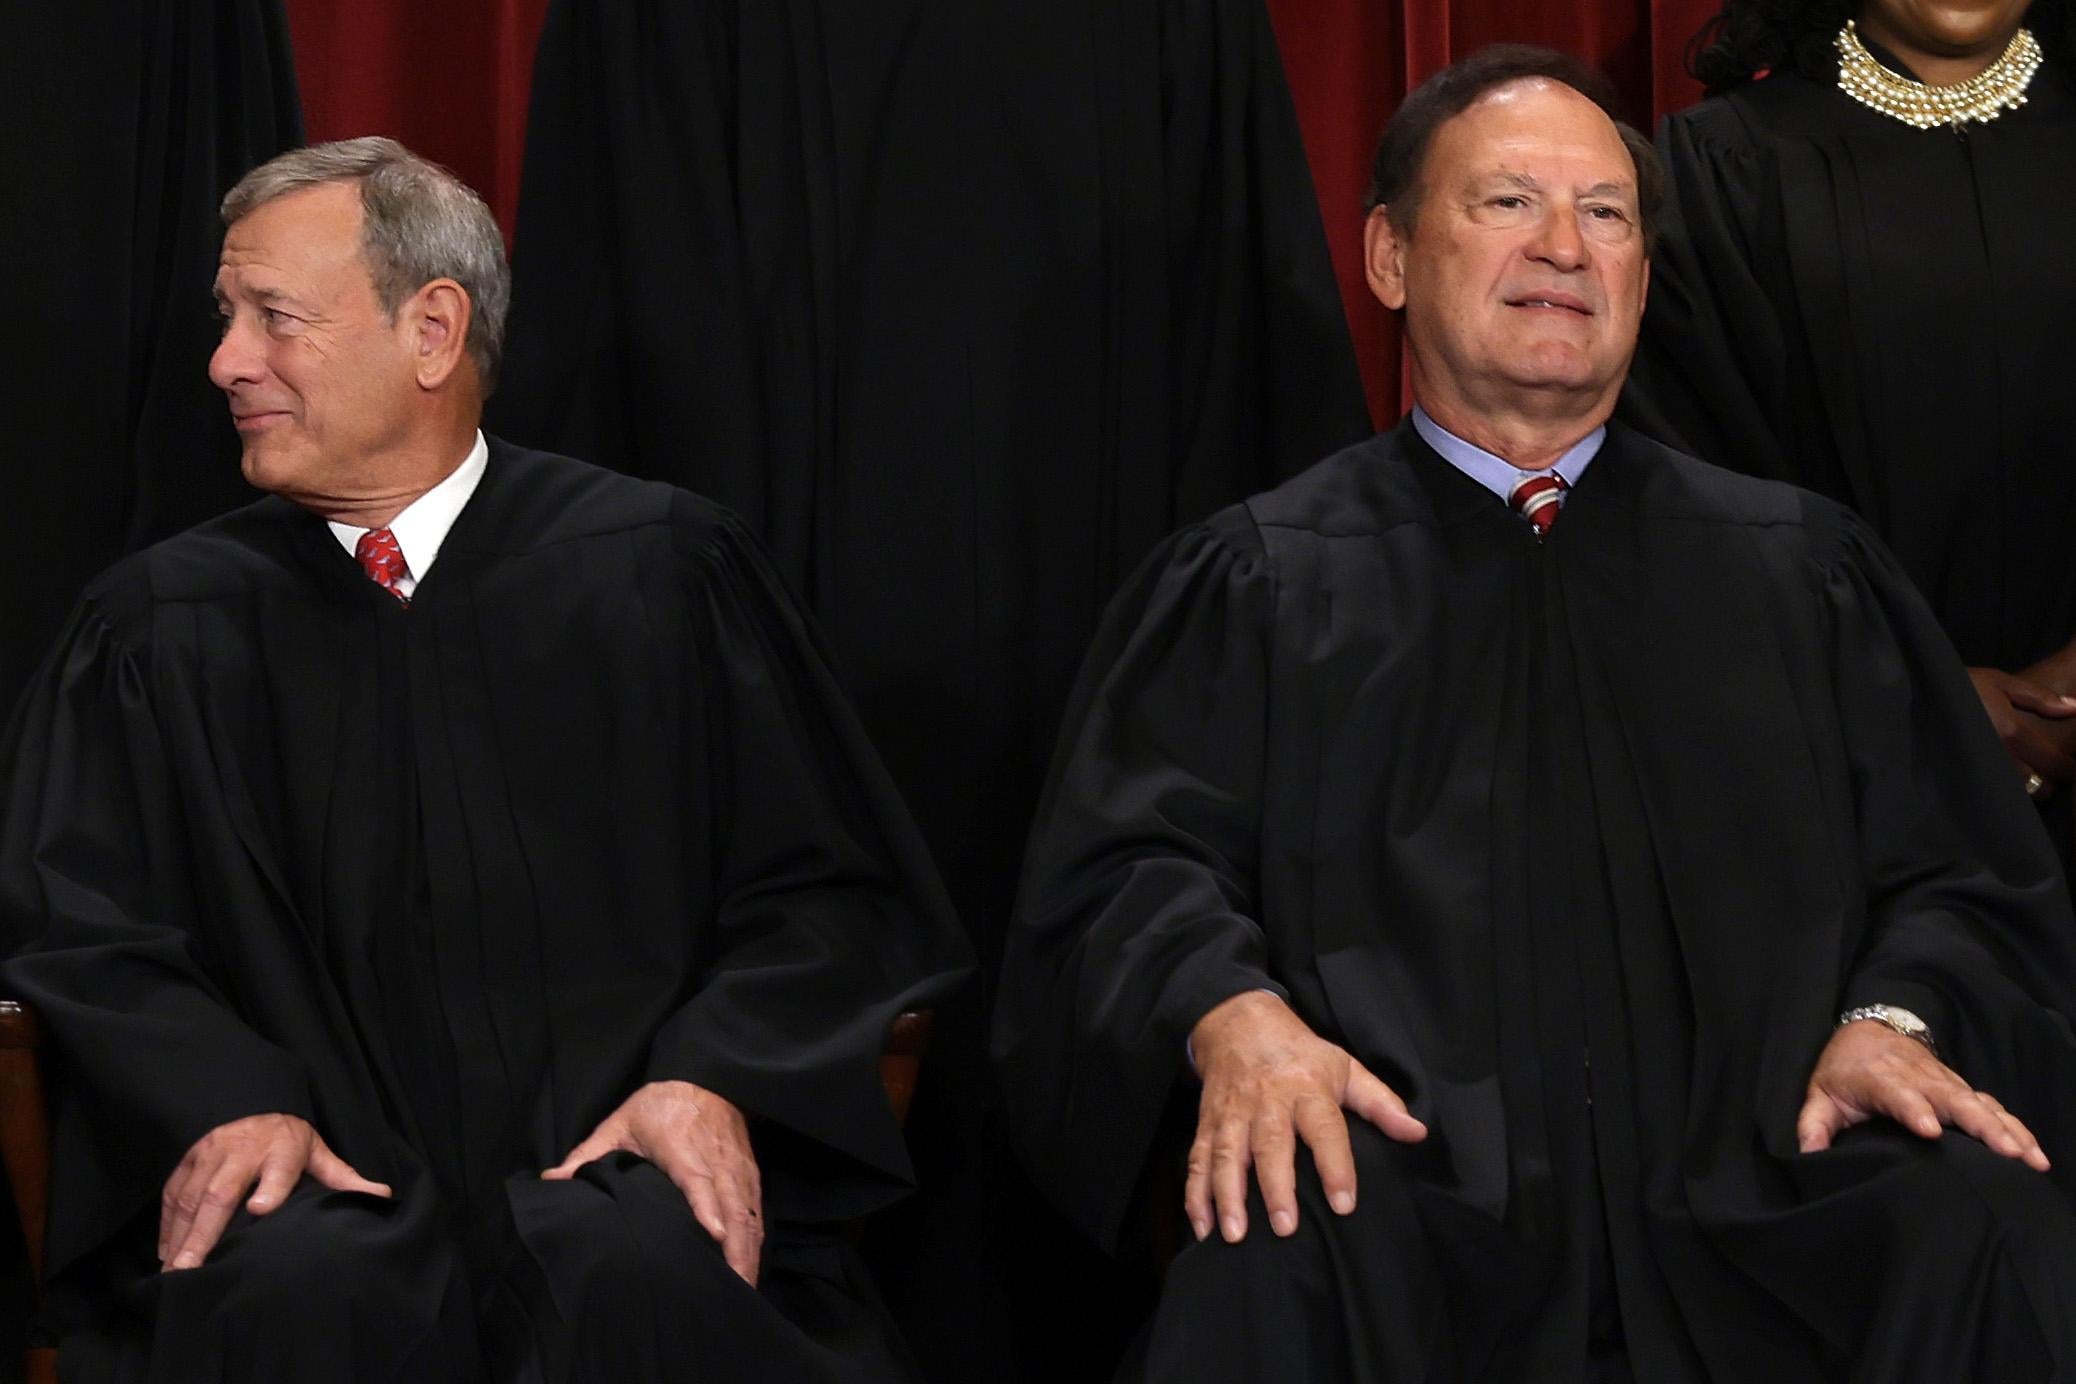 Roberts and Alito in robes